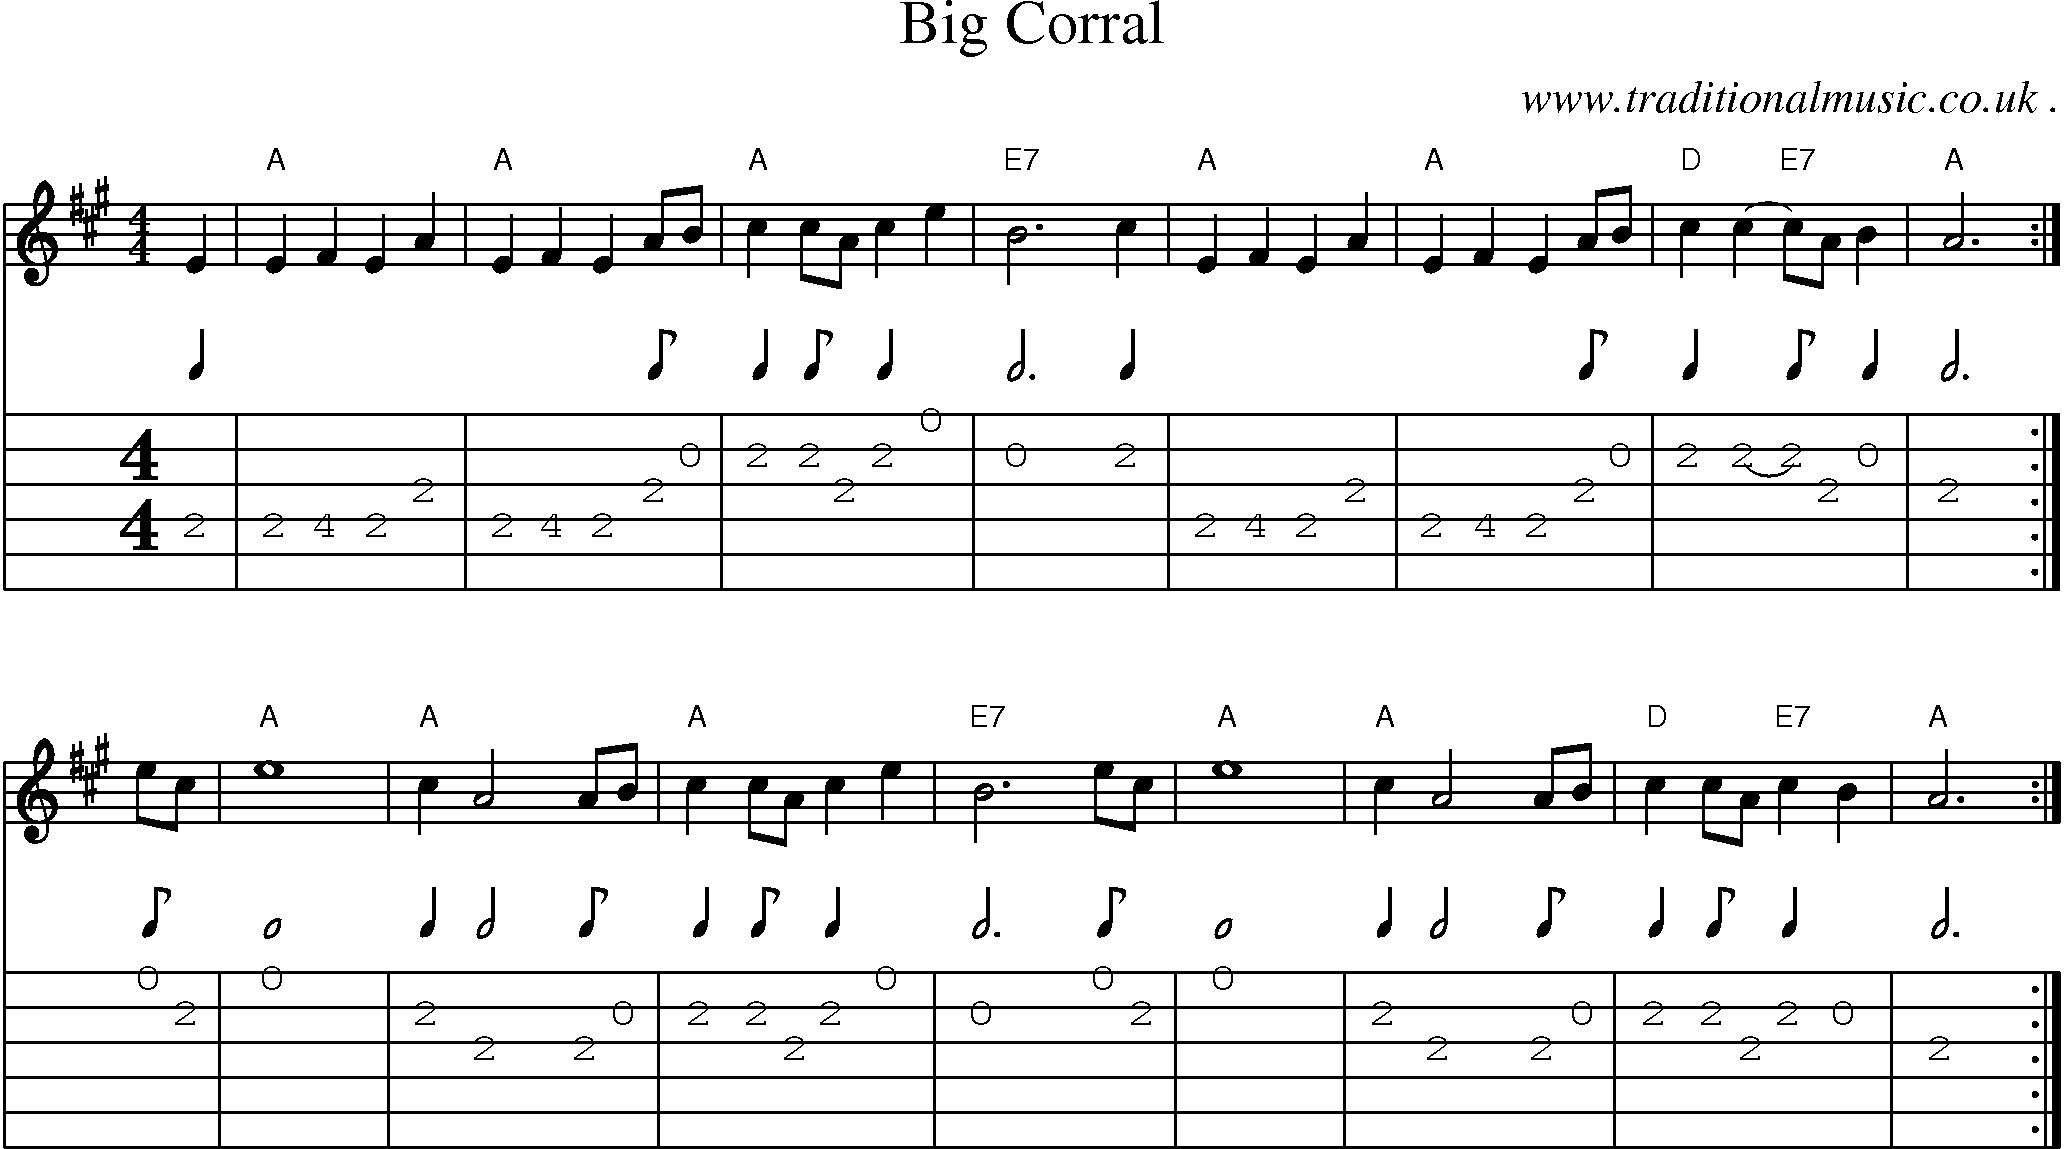 Sheet-Music and Guitar Tabs for Big Corral